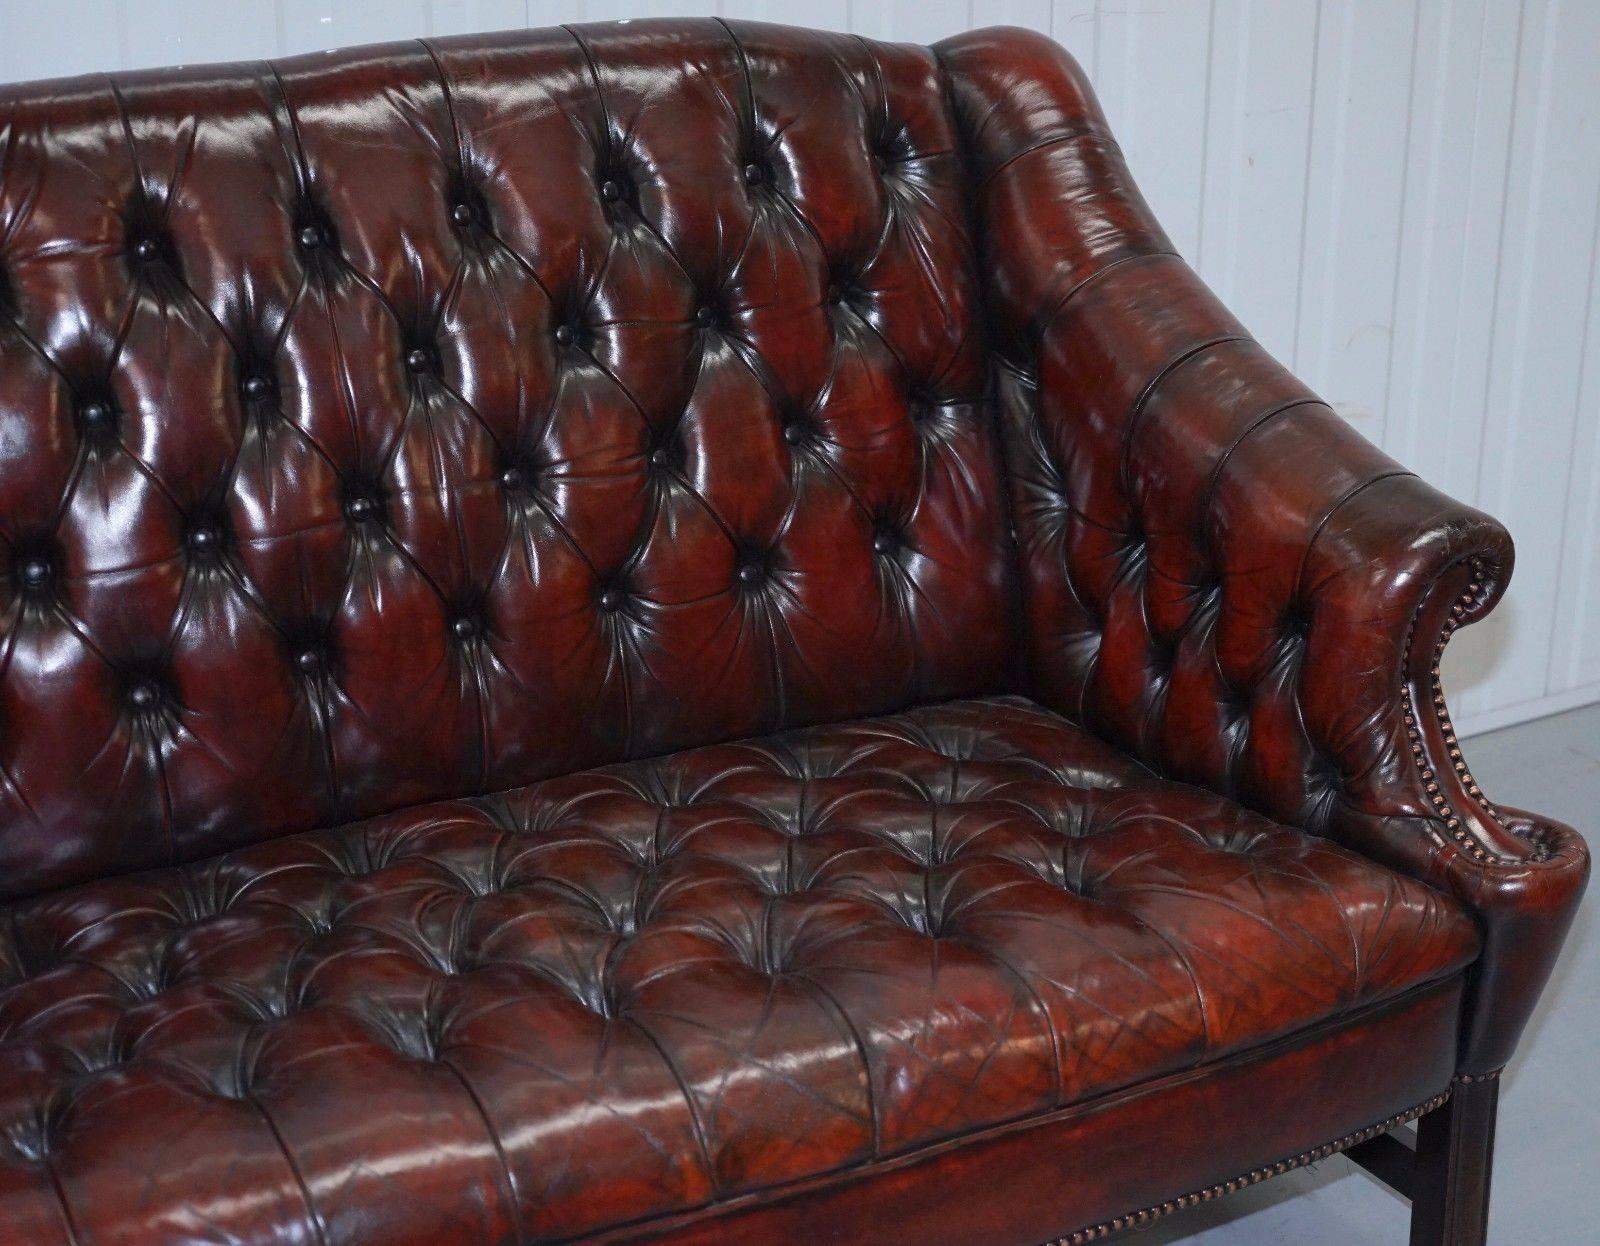 Hand-Carved Top to Bottom Restored Regency Styled Chesterfield Two-Seater Club Bench